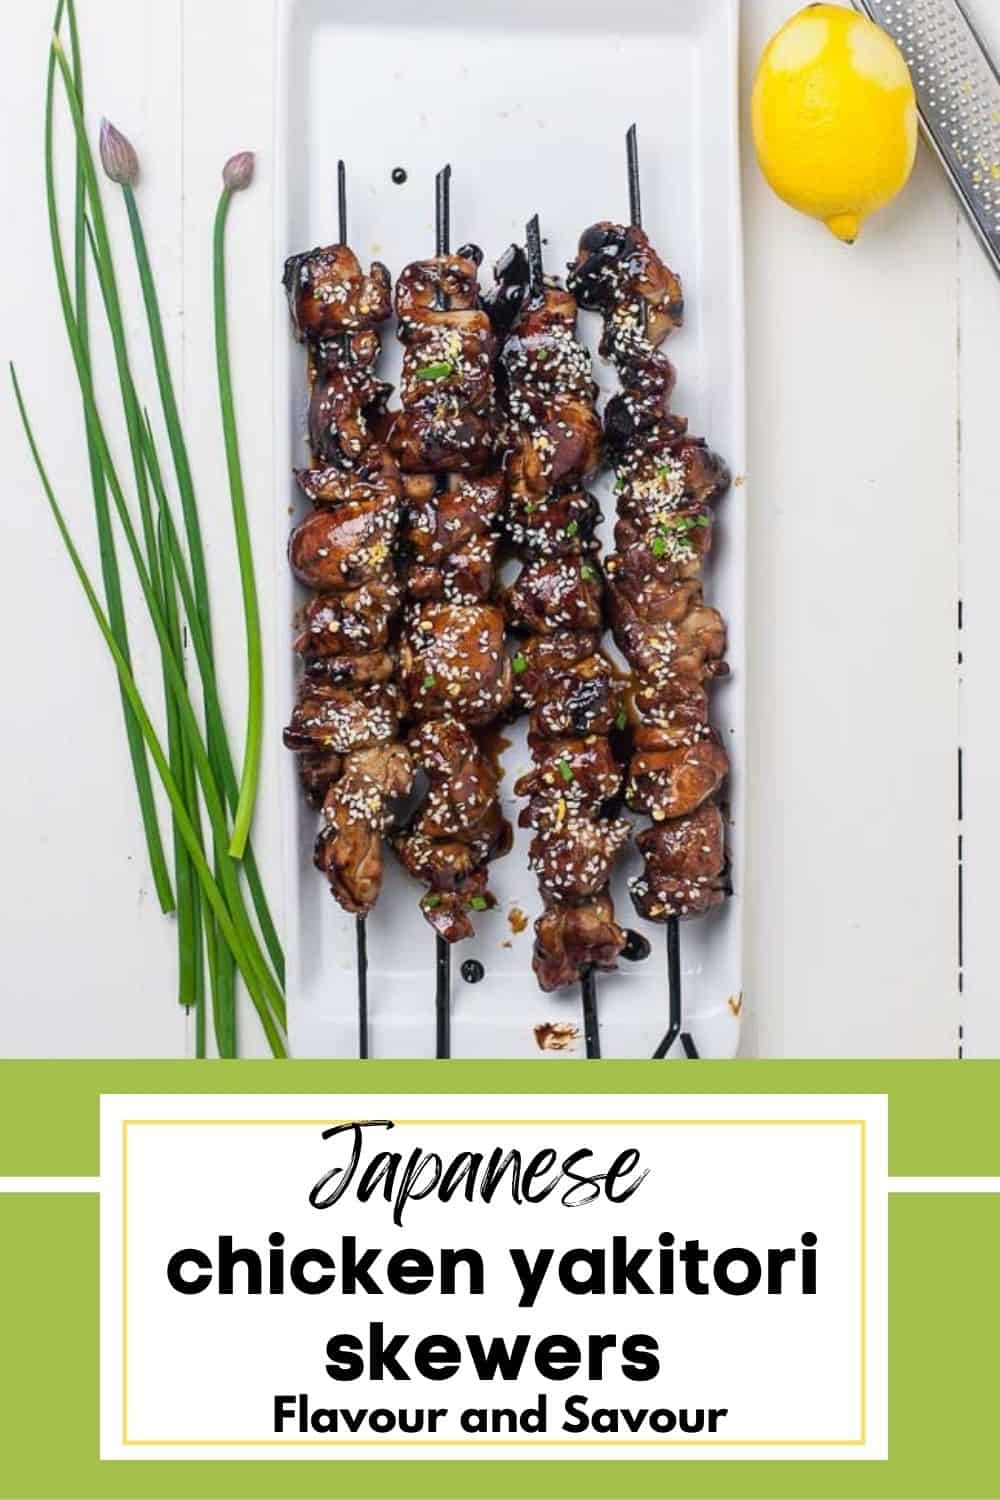 Easy Japanese Chicken Yakitori Skewers - Flavour and Savour